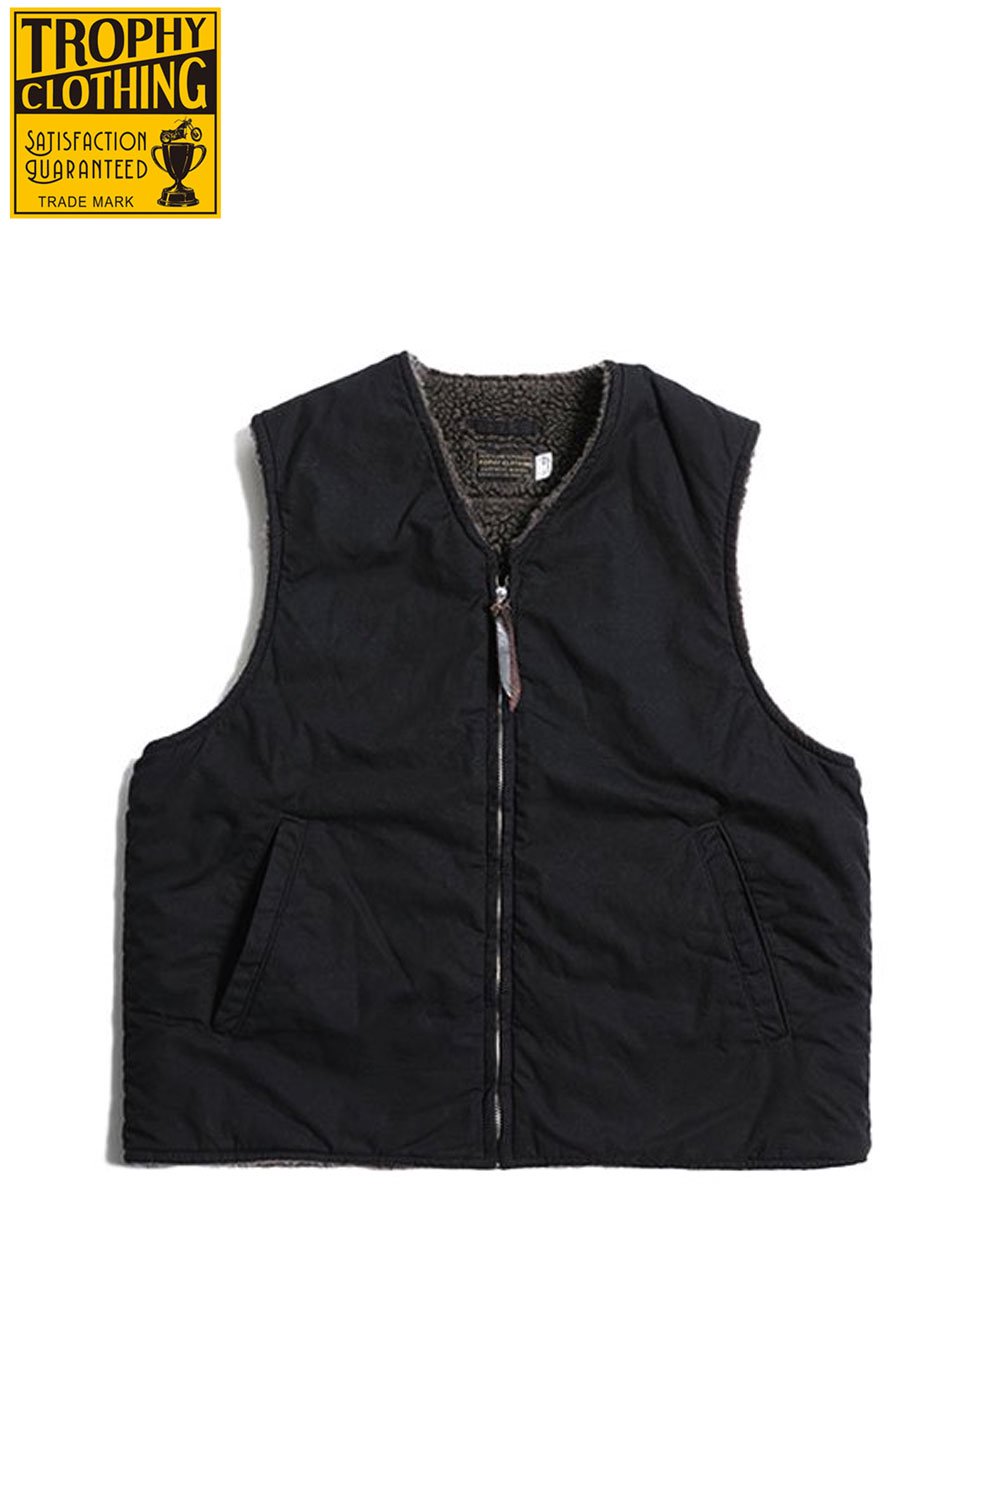 TROPHY CLOTHING(トロフィークロージング) デッキベスト DECK TR.MFG. VEST TR22AW-301 通販正規取扱 |  ハーレムストア公式通販サイト